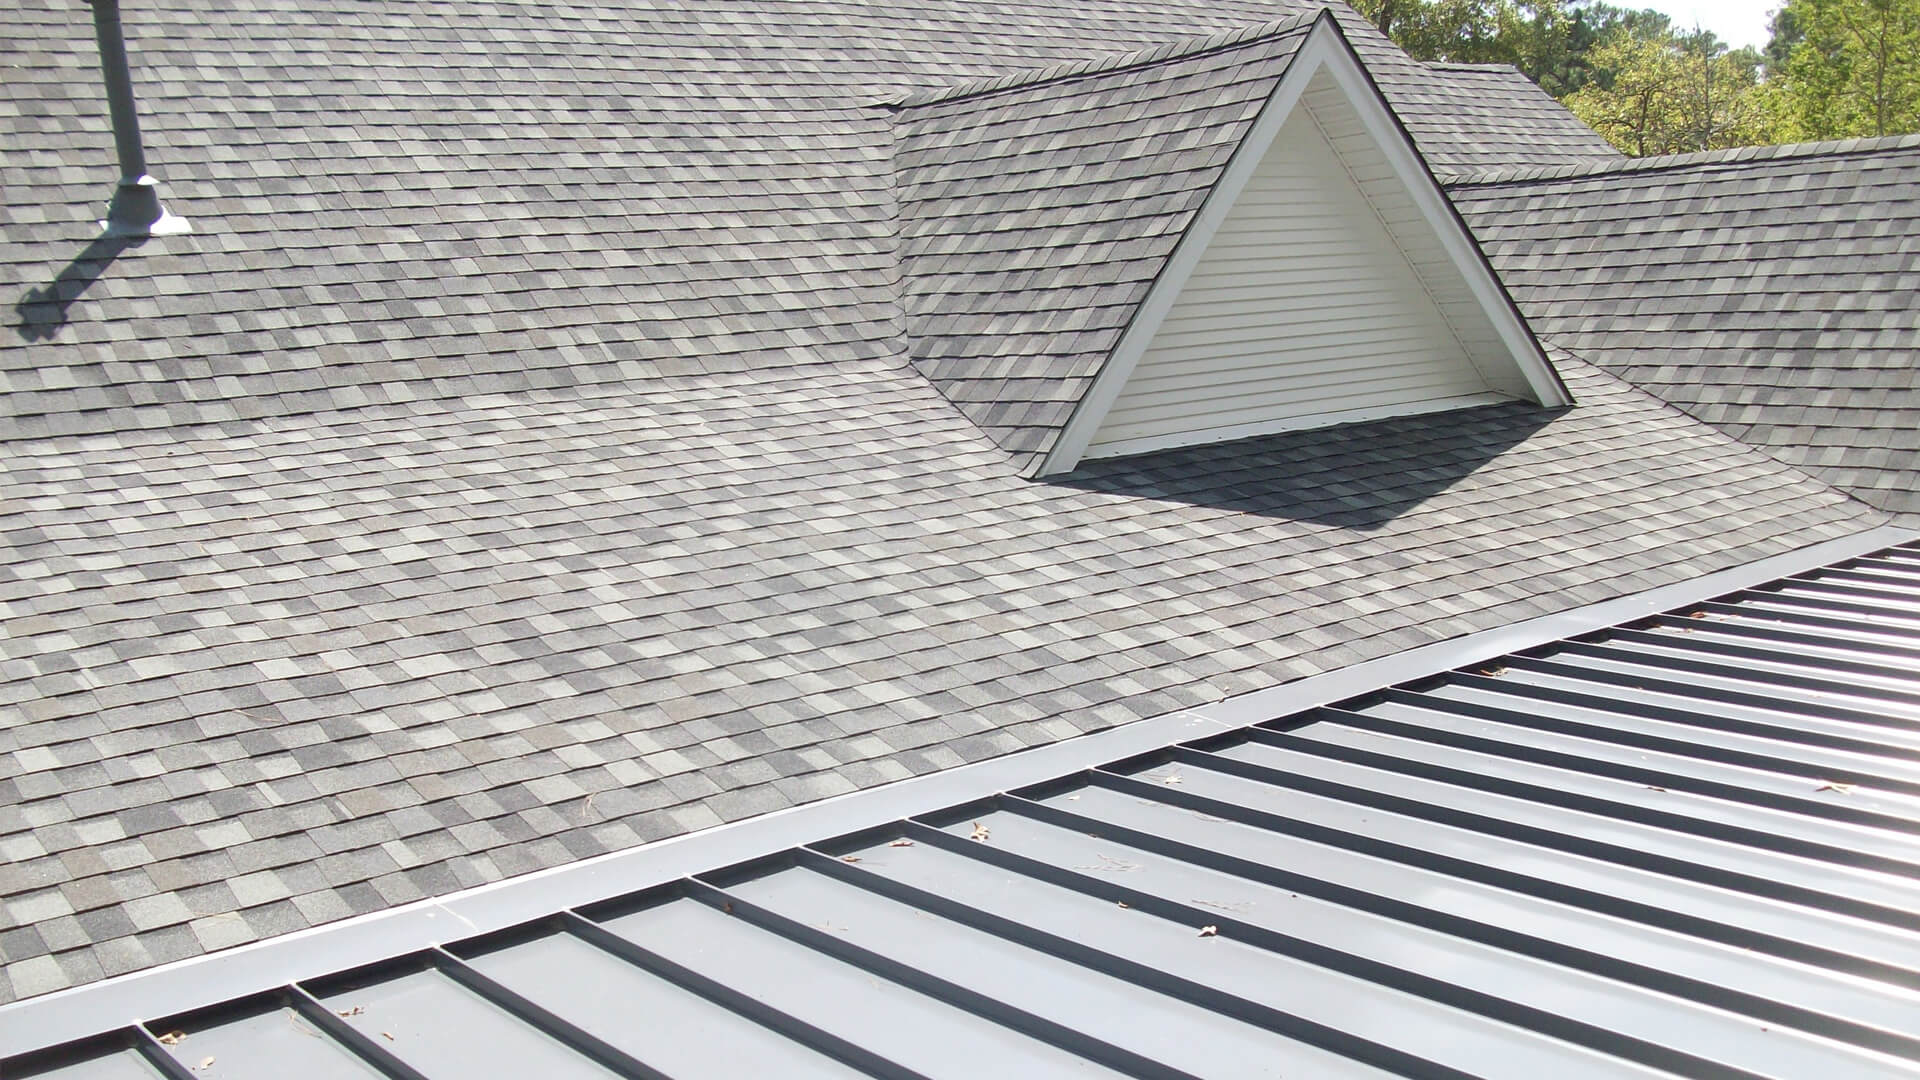 Laminate Shingles - Schulte Roofing